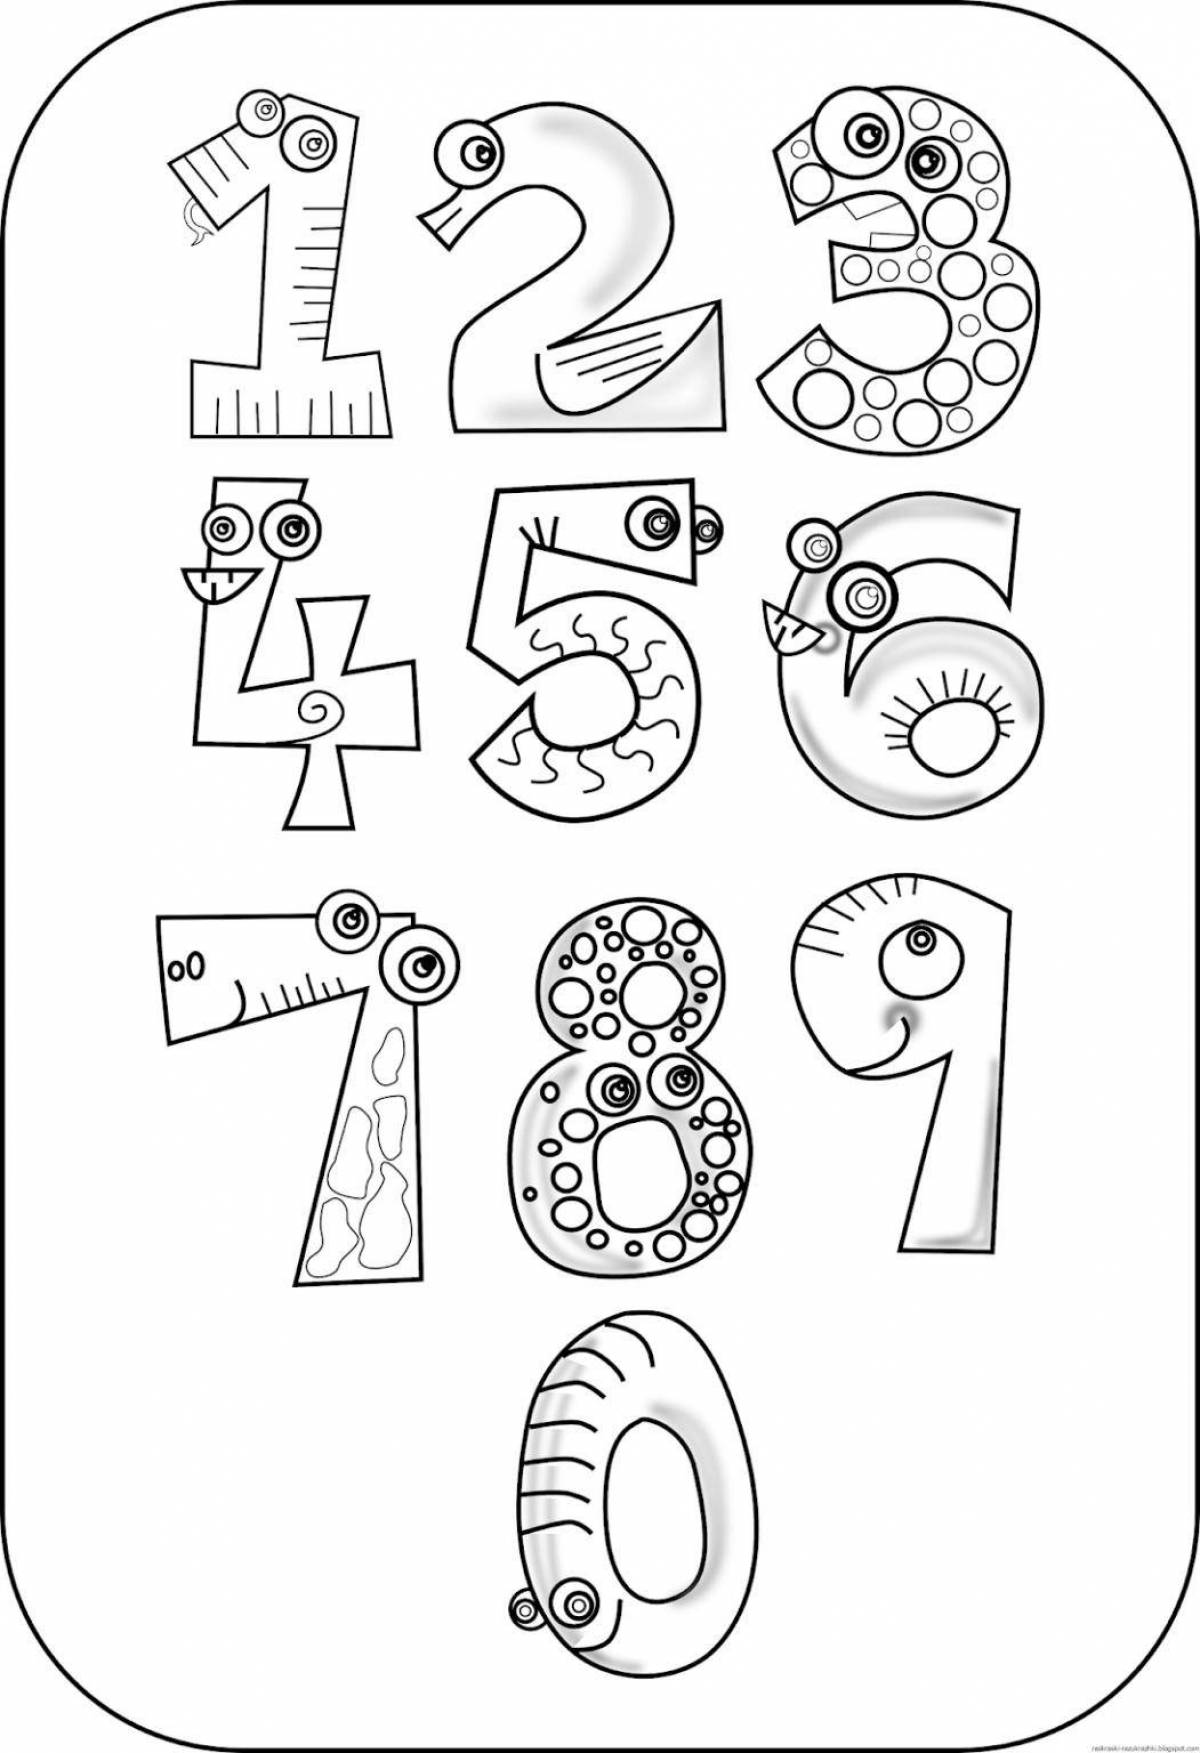 Colorful numbers coloring book with eyes